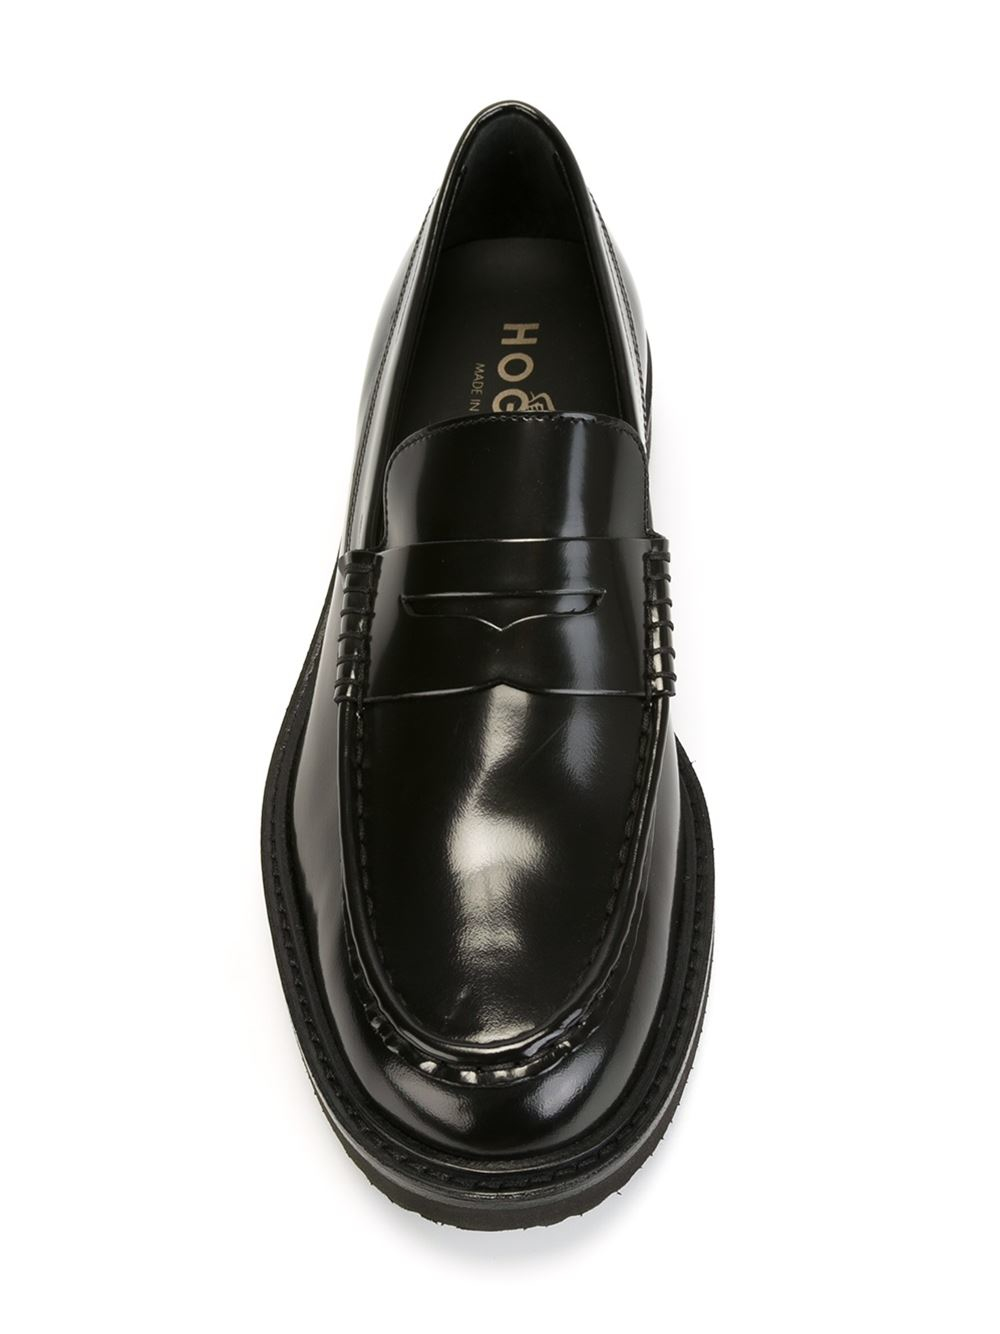 Lyst - Hogan Rubber Sole Penny Loafers in Black for Men